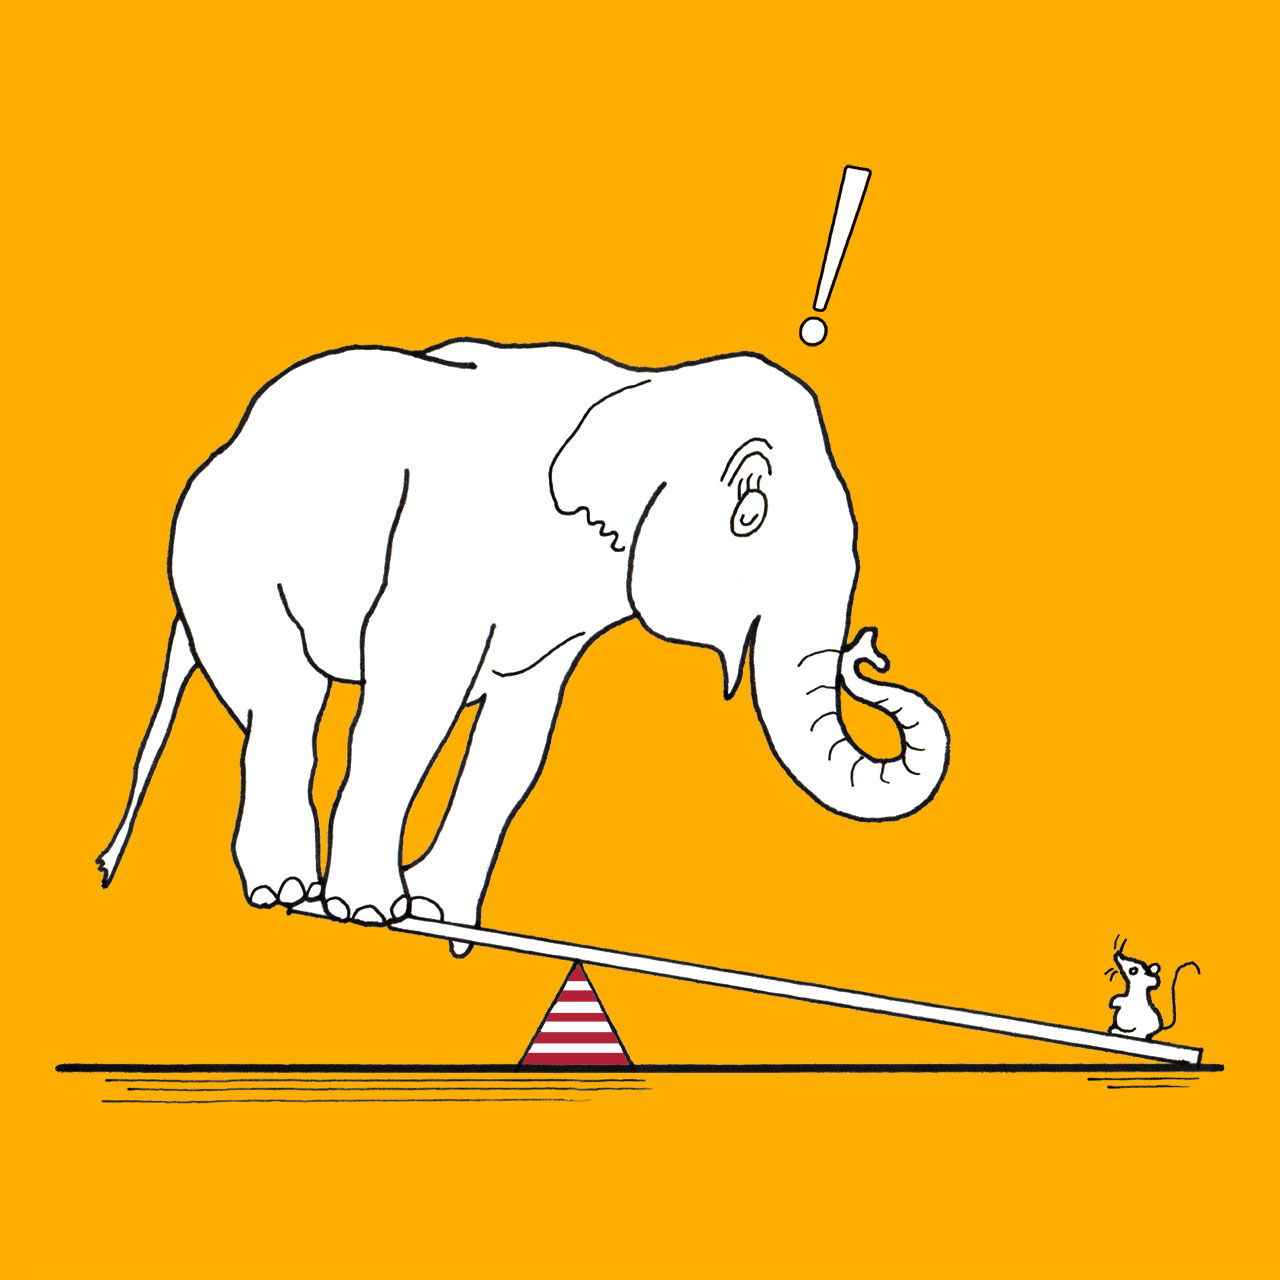 A small mouse lifts a big elephant on a teeter totter.